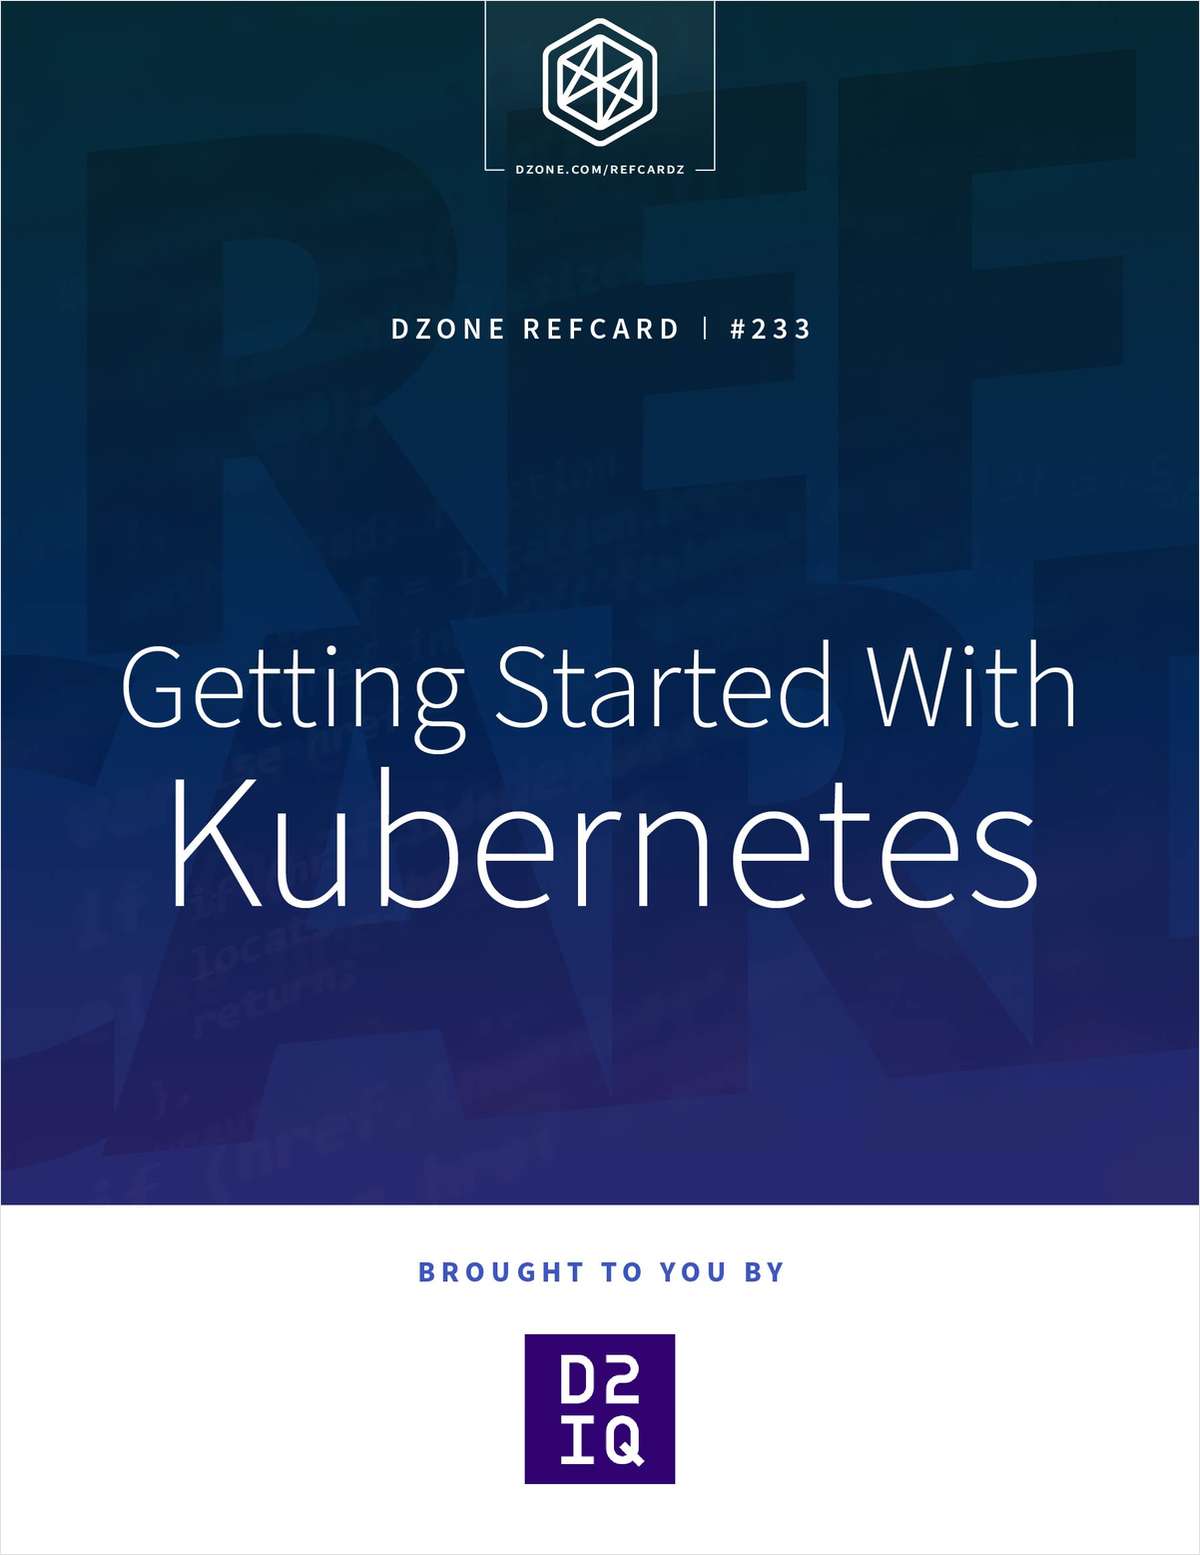 Getting Started With Kubernetes